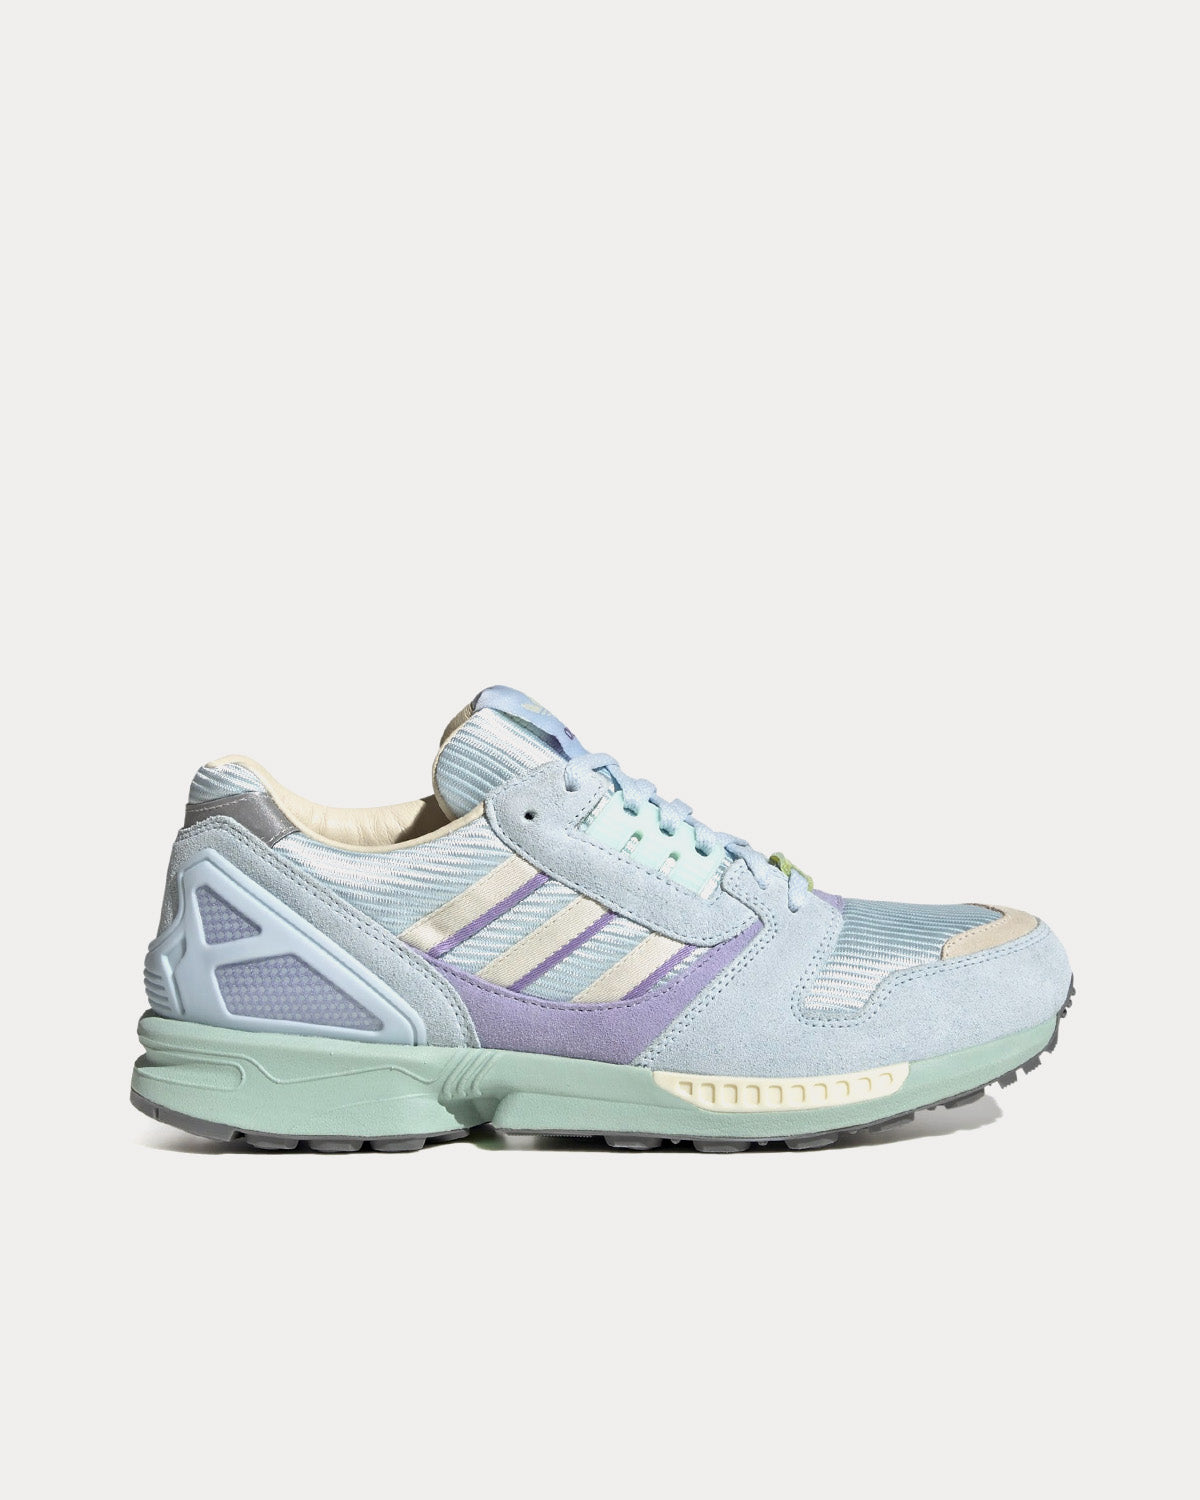 ZX 8000 Sky Tint / Cream White / Clear Grey Low Top Sneakers